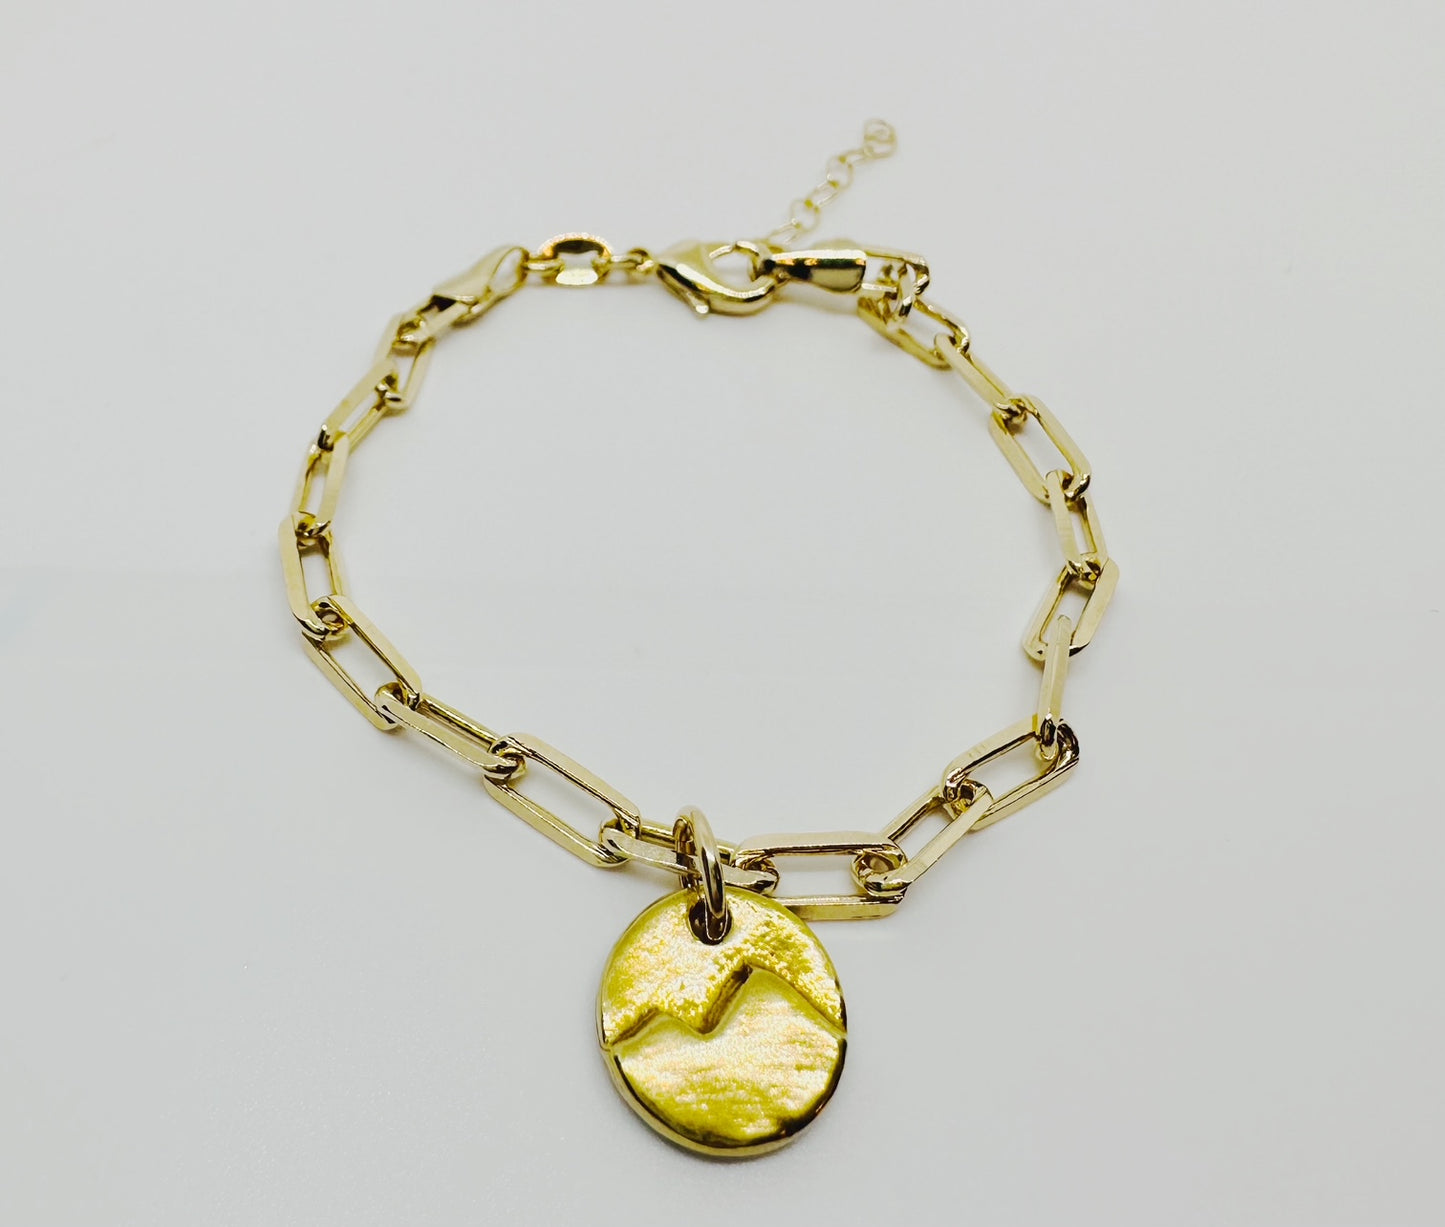 Mountain Link Bracelet. Gold-fill chain with a bronze mountain charm, handmade with a precious metal clay process. 